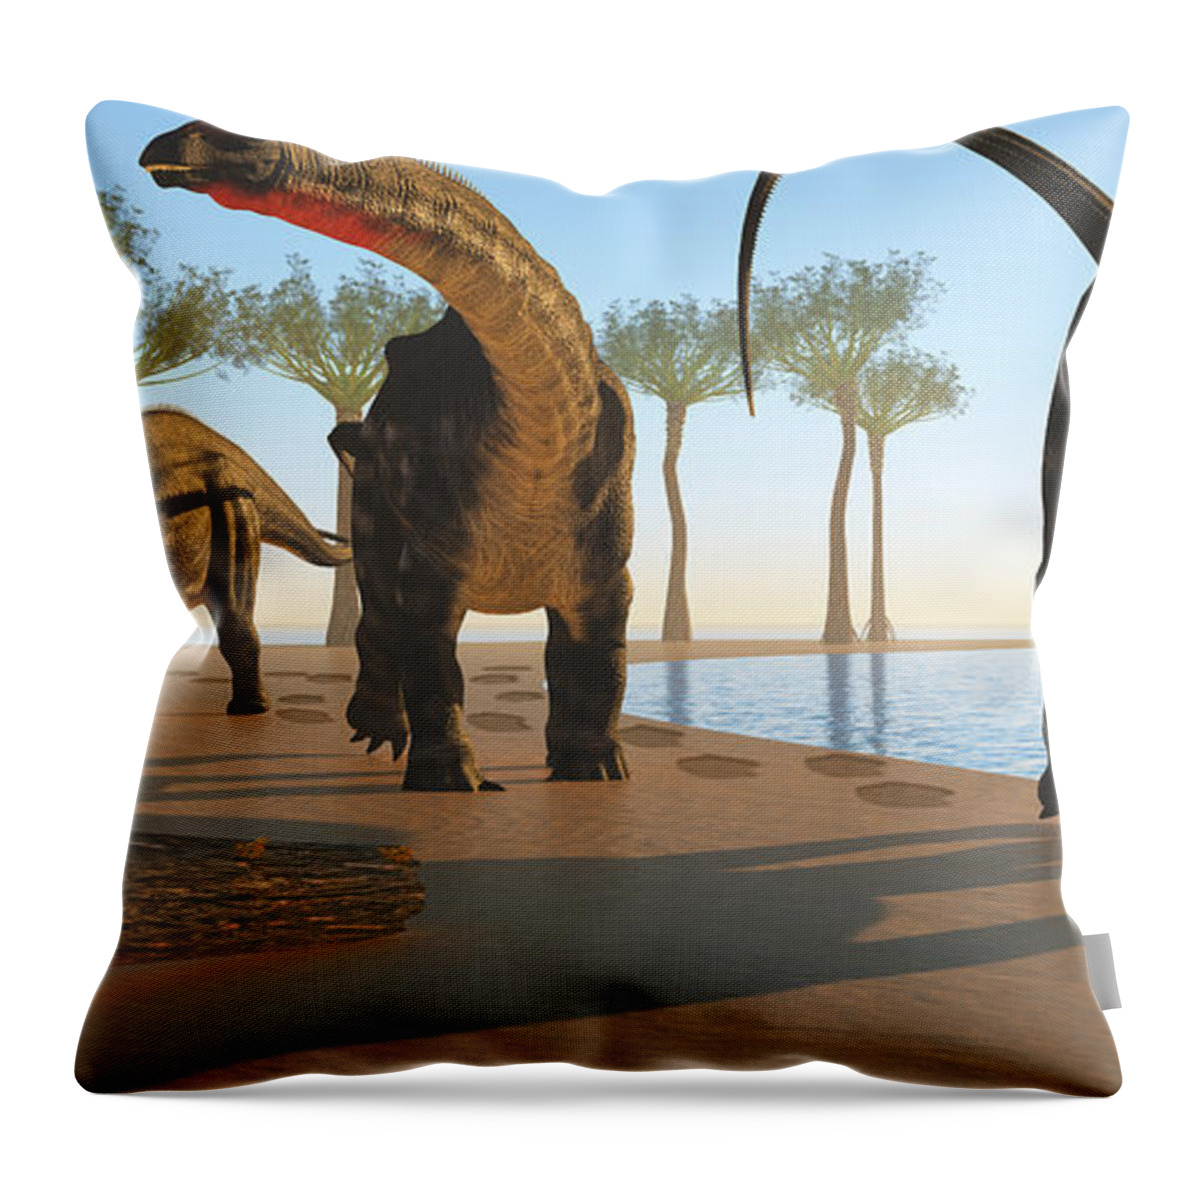 Apatasaurus Throw Pillow featuring the painting Apatosaurus Dinosaur Shore by Corey Ford